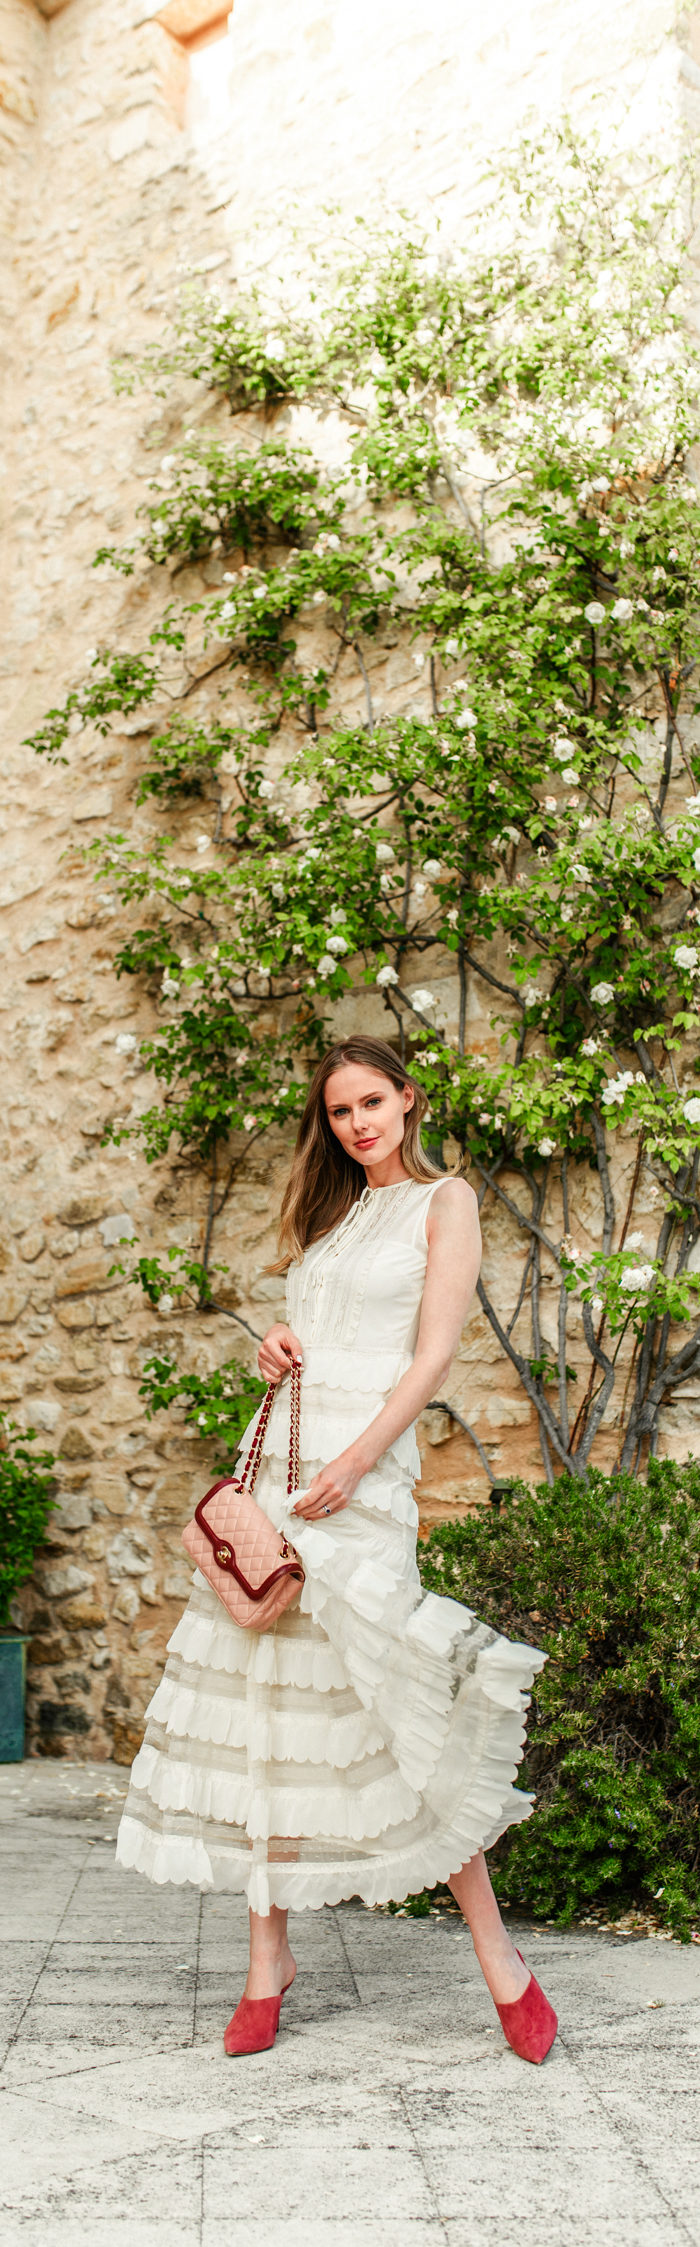 Alyssa Campanella of The A List blog visits La Verrière in Provence, France wearing RED Valentino georgette scalloped dress